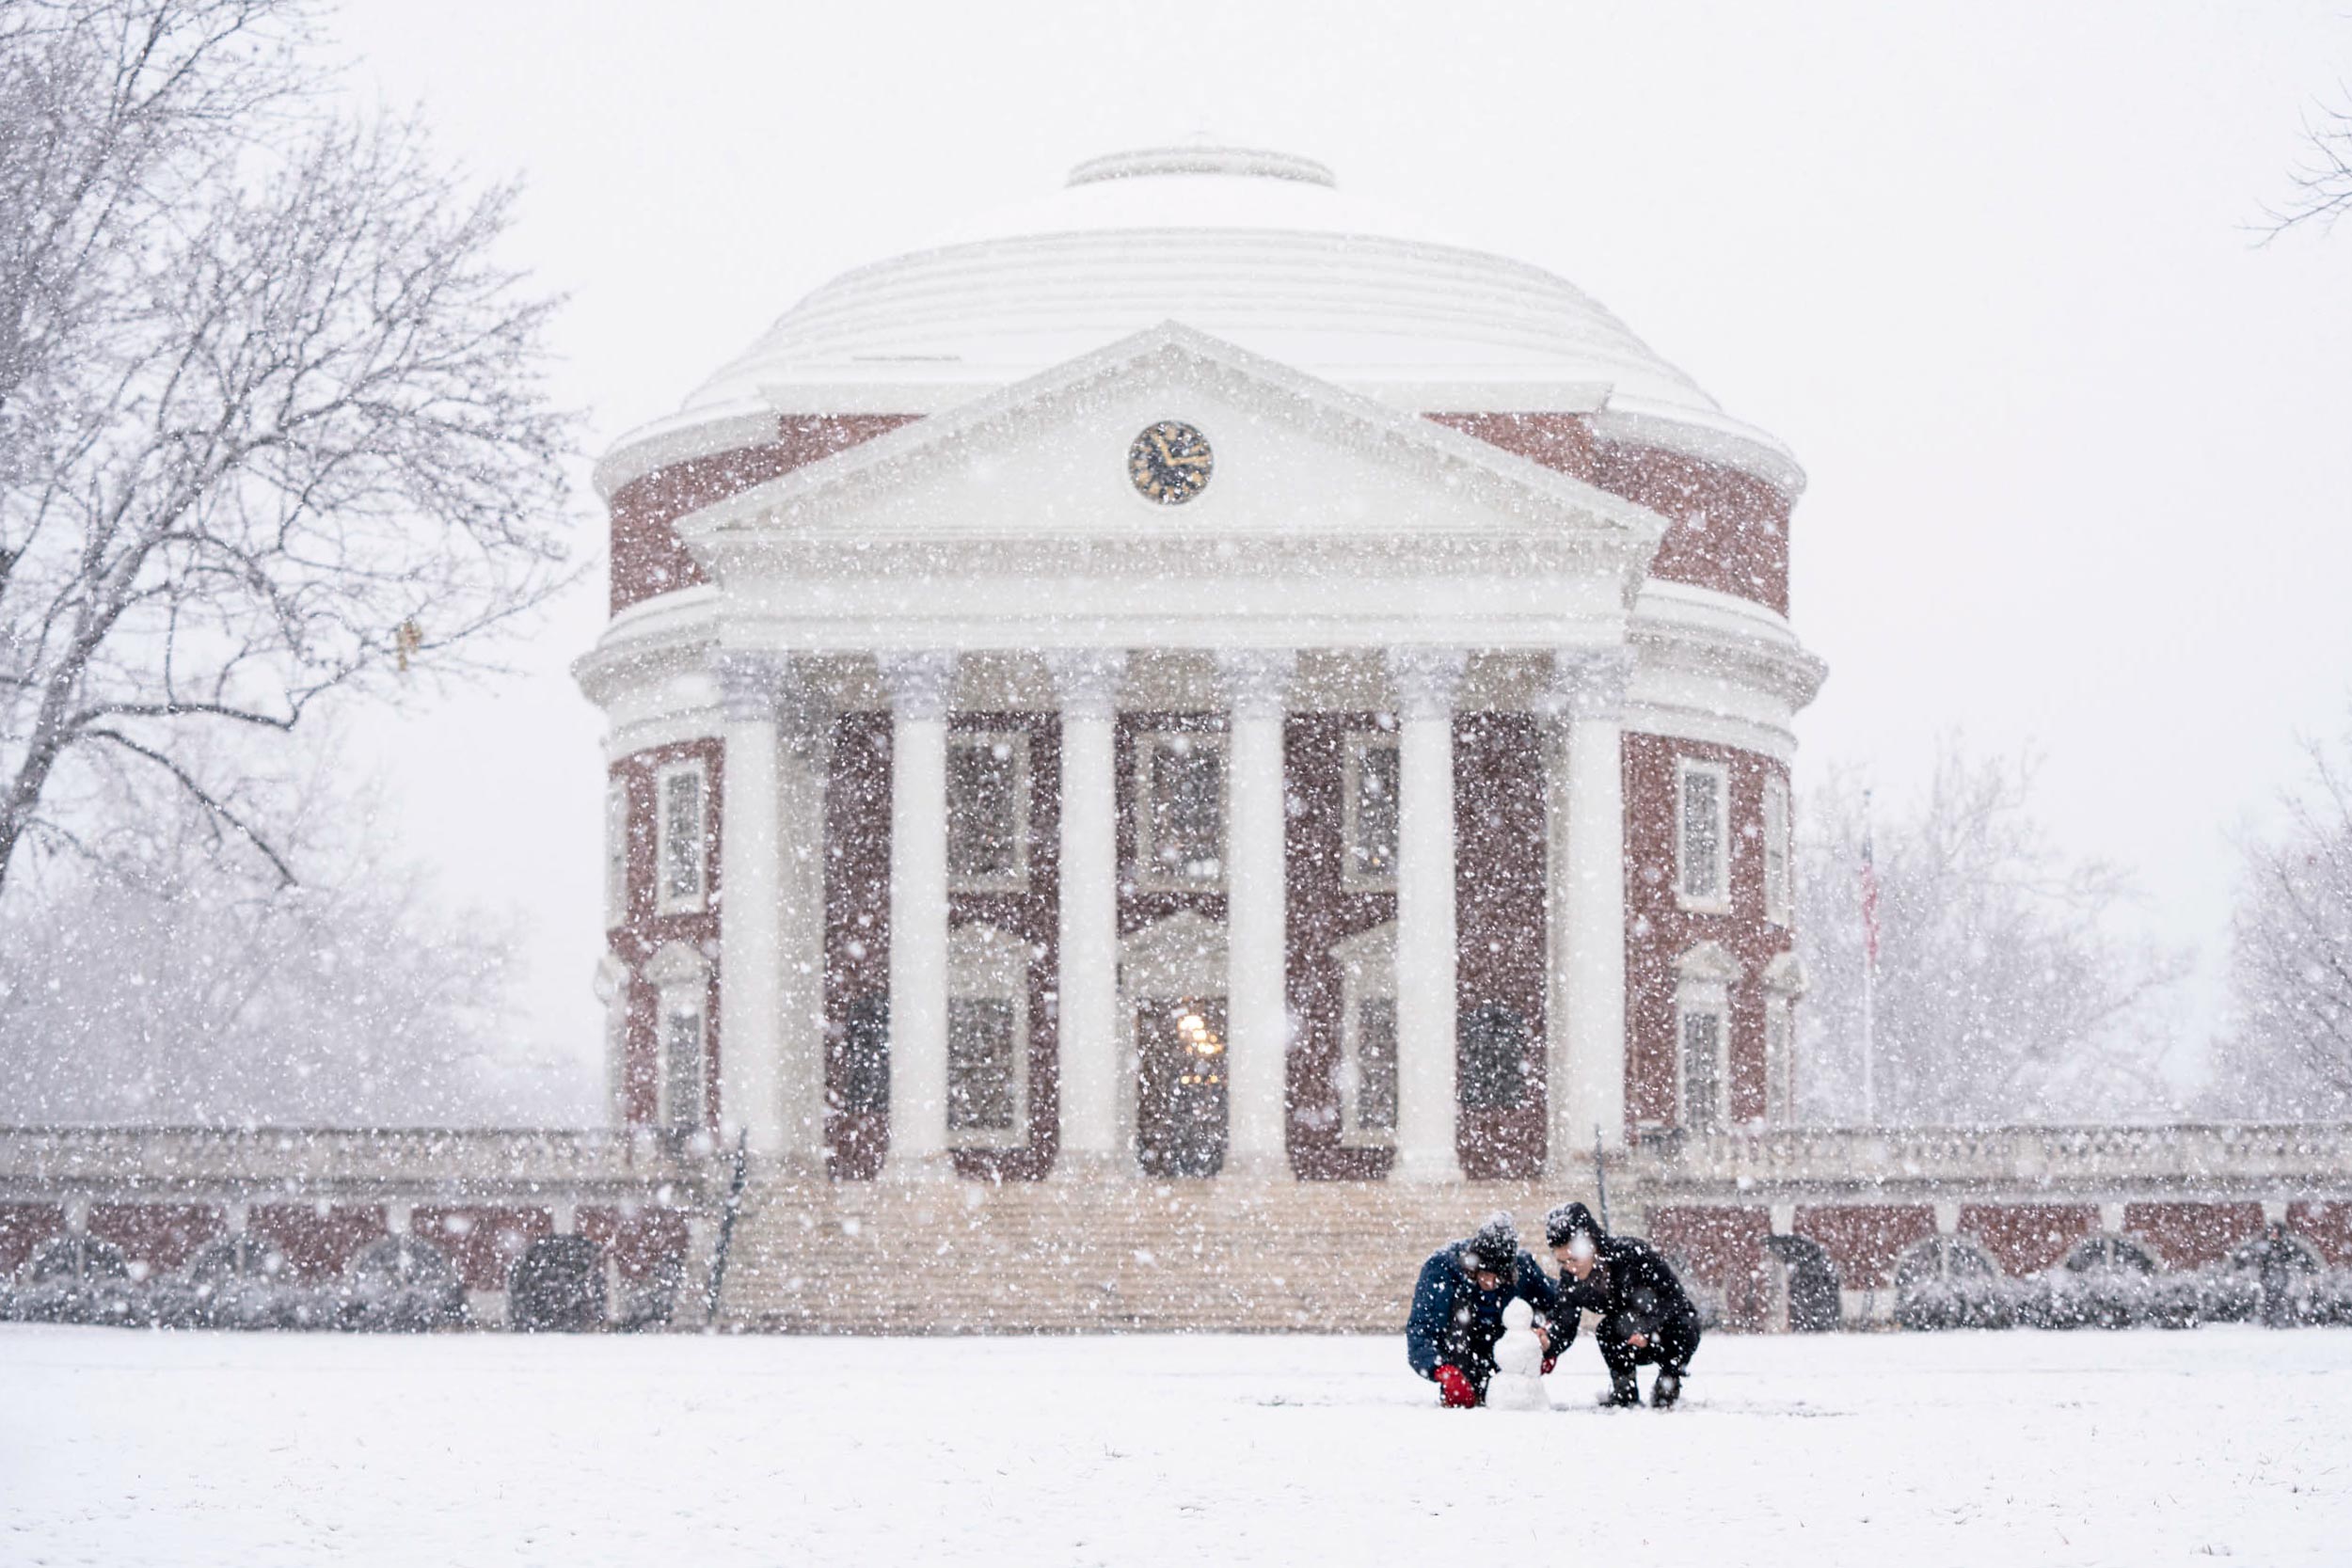 Two people building a small snowman in front of the Rotunda